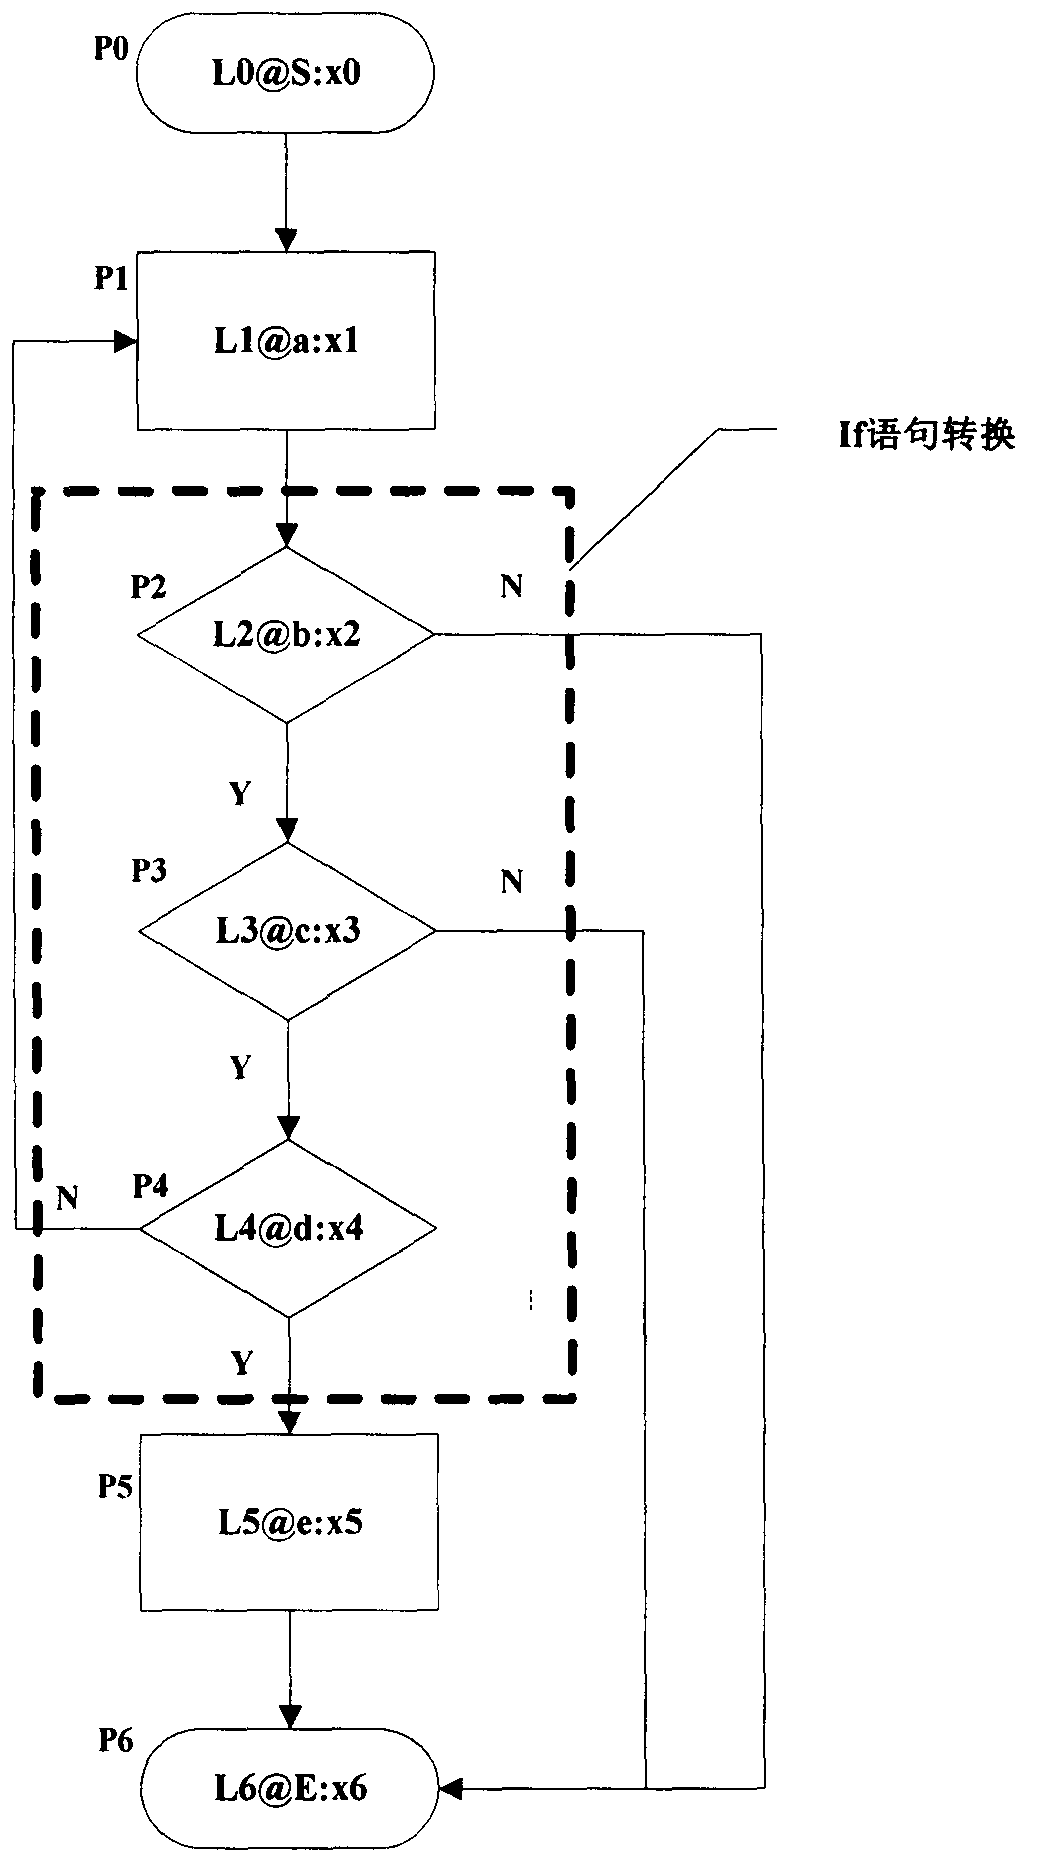 Method for converting flow chart into executable language